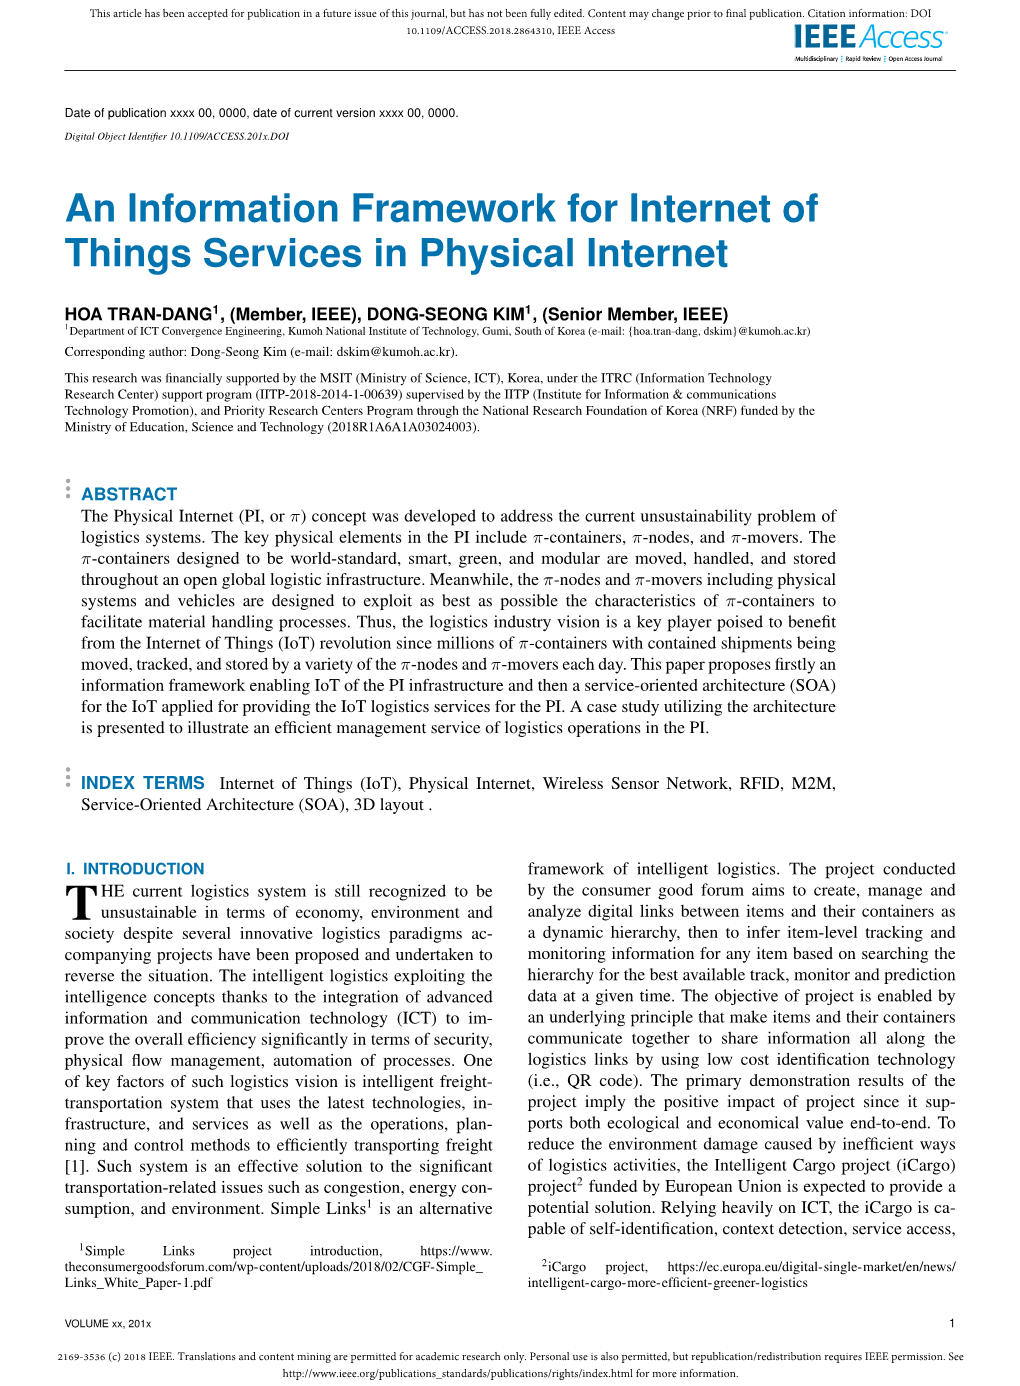 An Information Framework for Internet of Things Services in Physical Internet